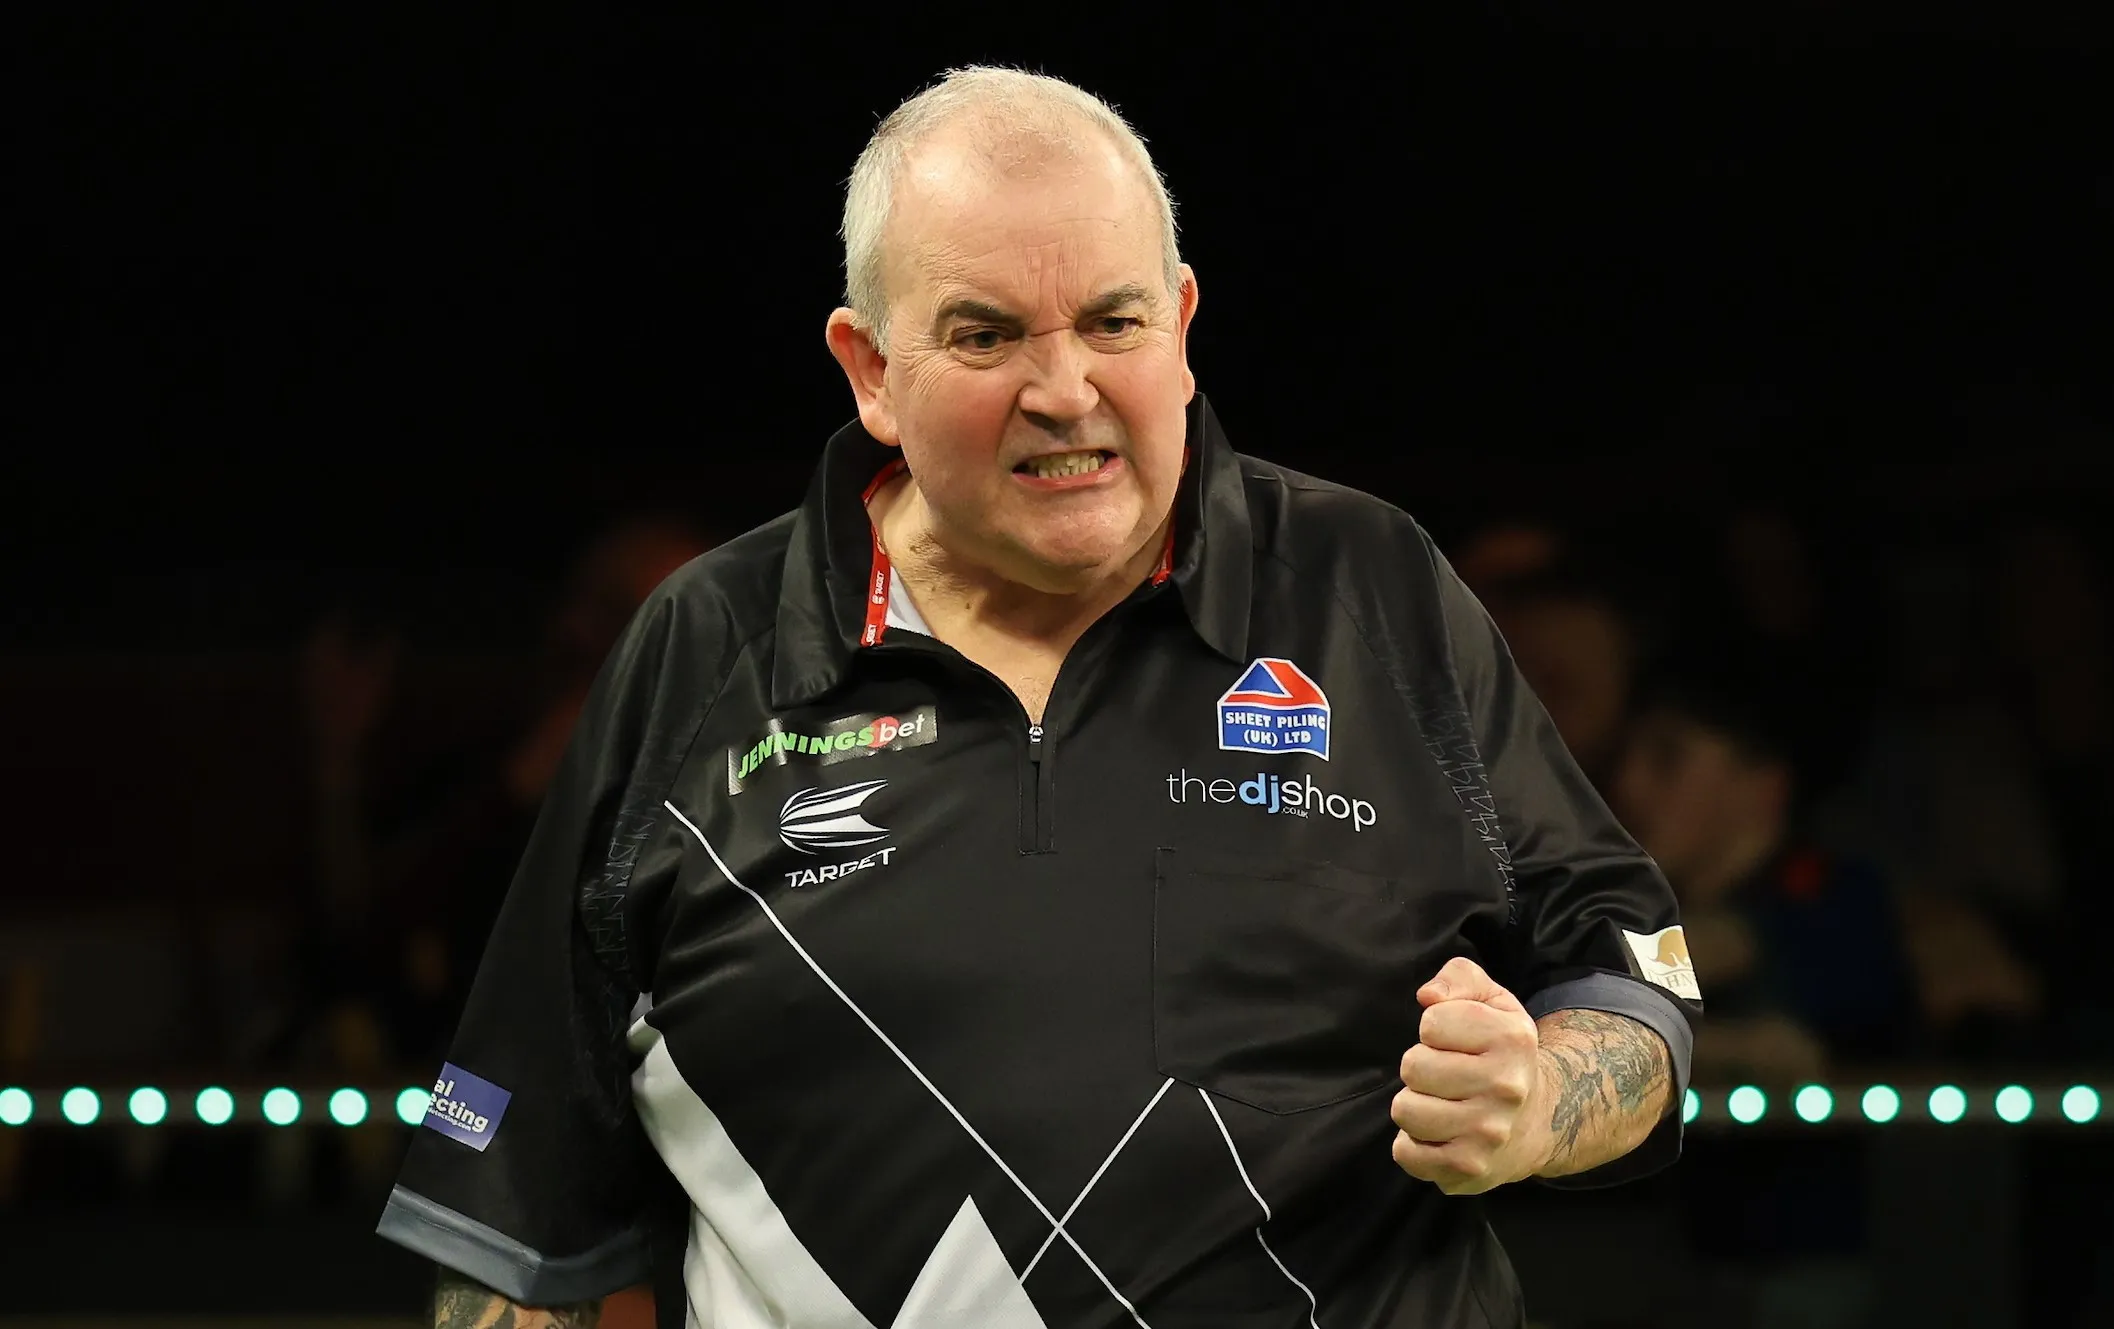 phil taylor wsdtwc20231919